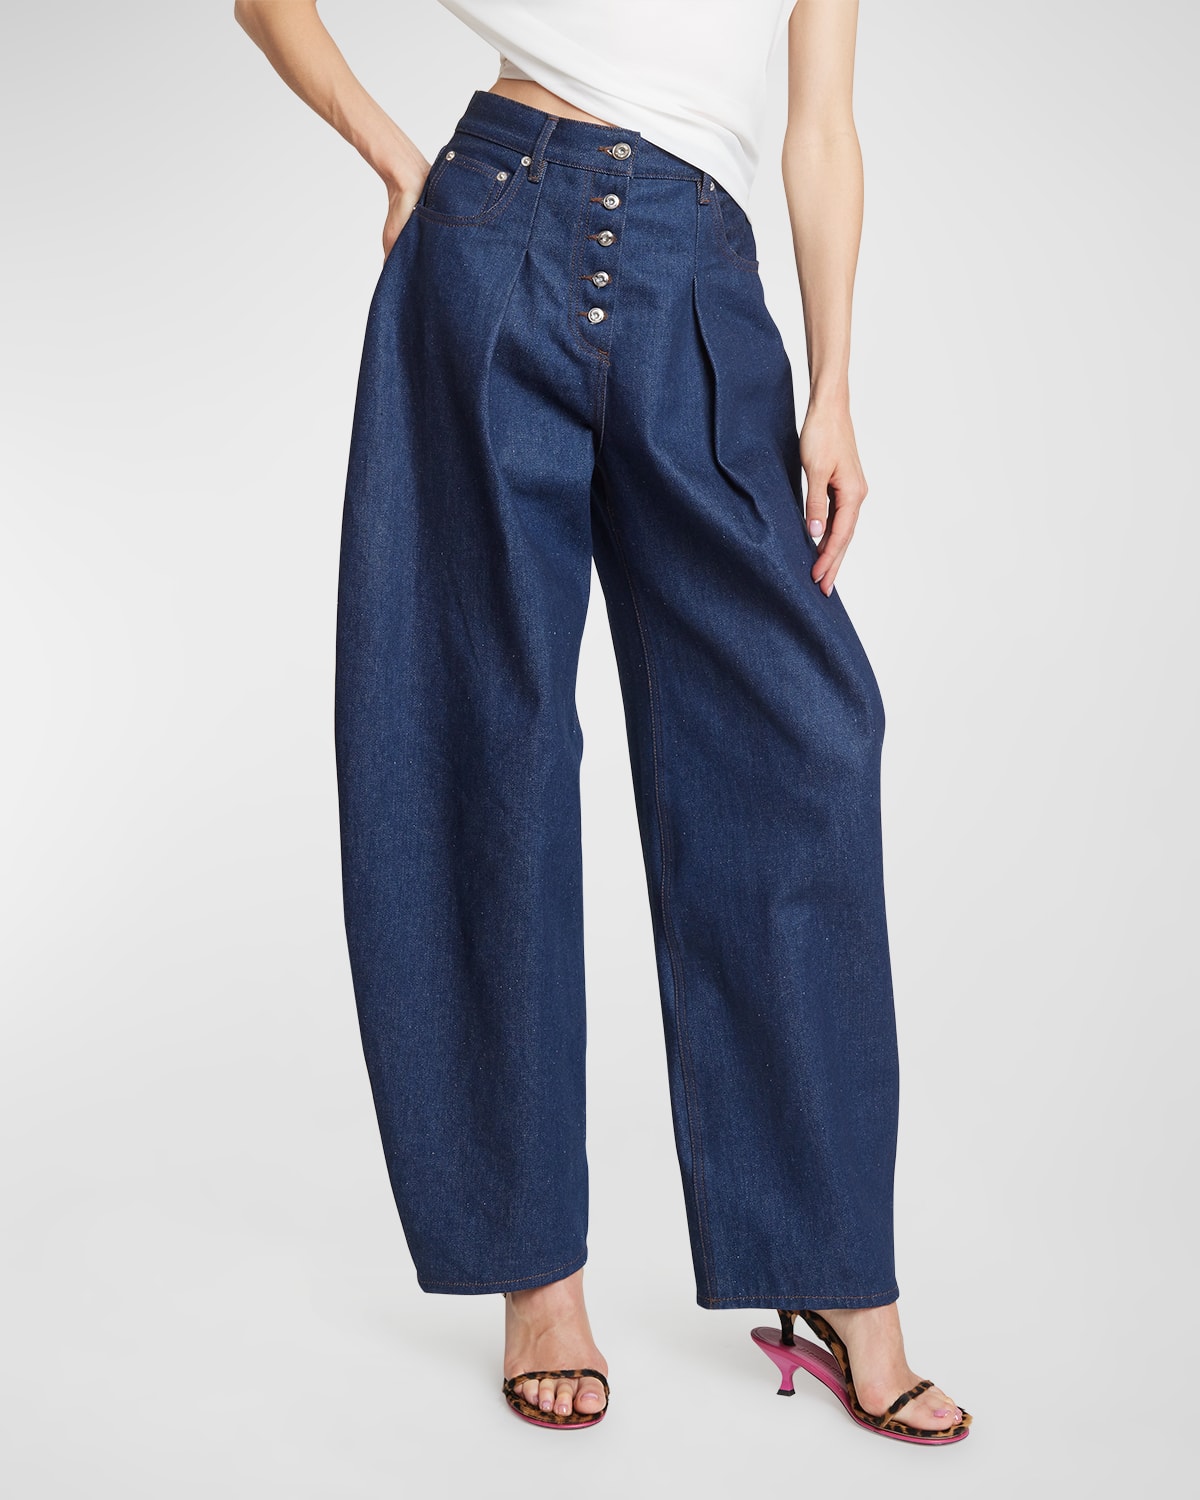 Ovalo Curved Wide-Leg Button-Fly Jeans